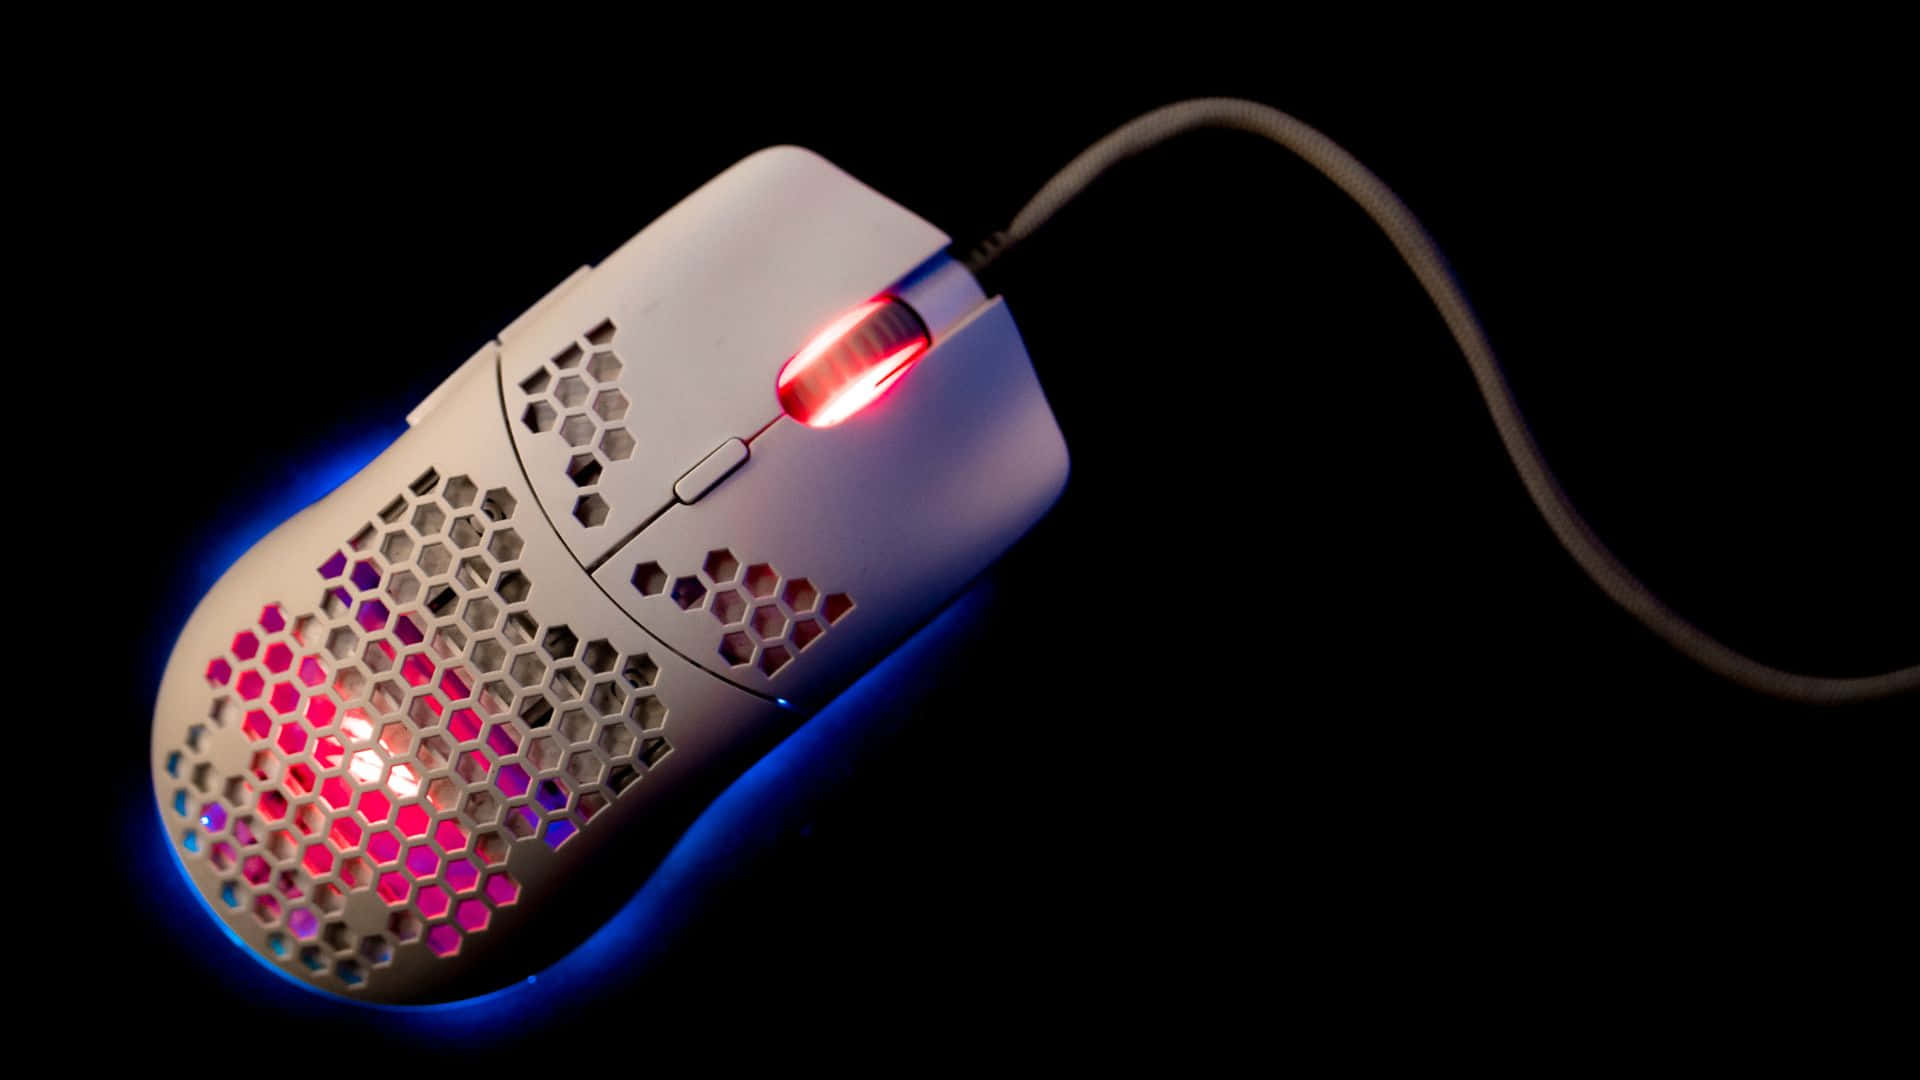 Discover the world's deadliest gaming mouse" Wallpaper